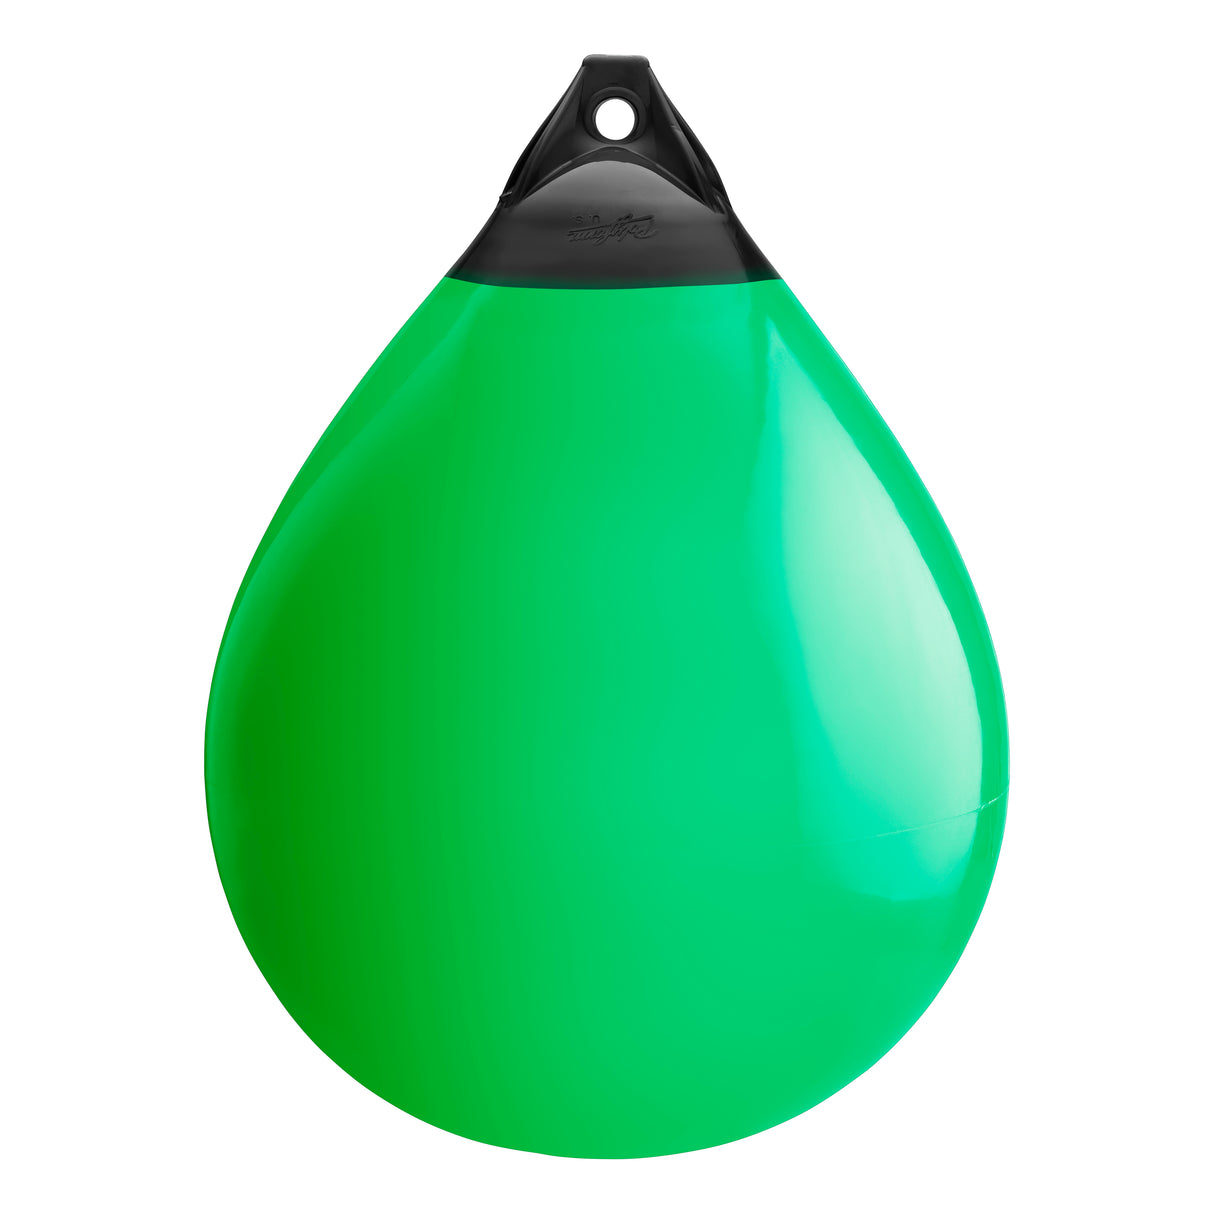 Green buoy with Black-Top, Polyform A-7